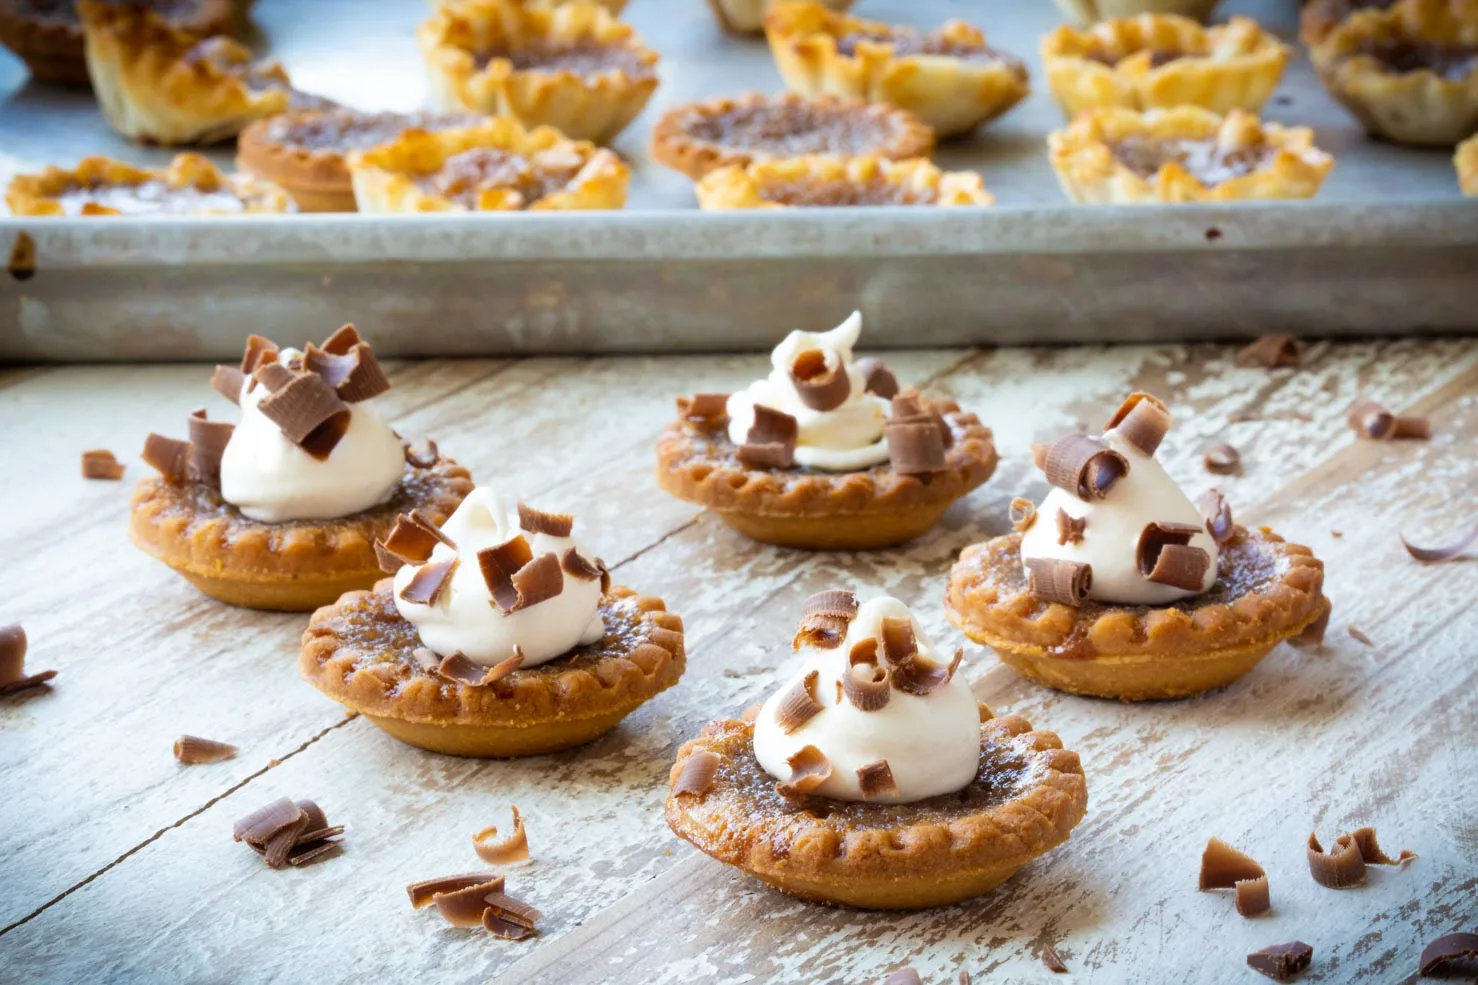 Decorated Pecan Butter Tarts